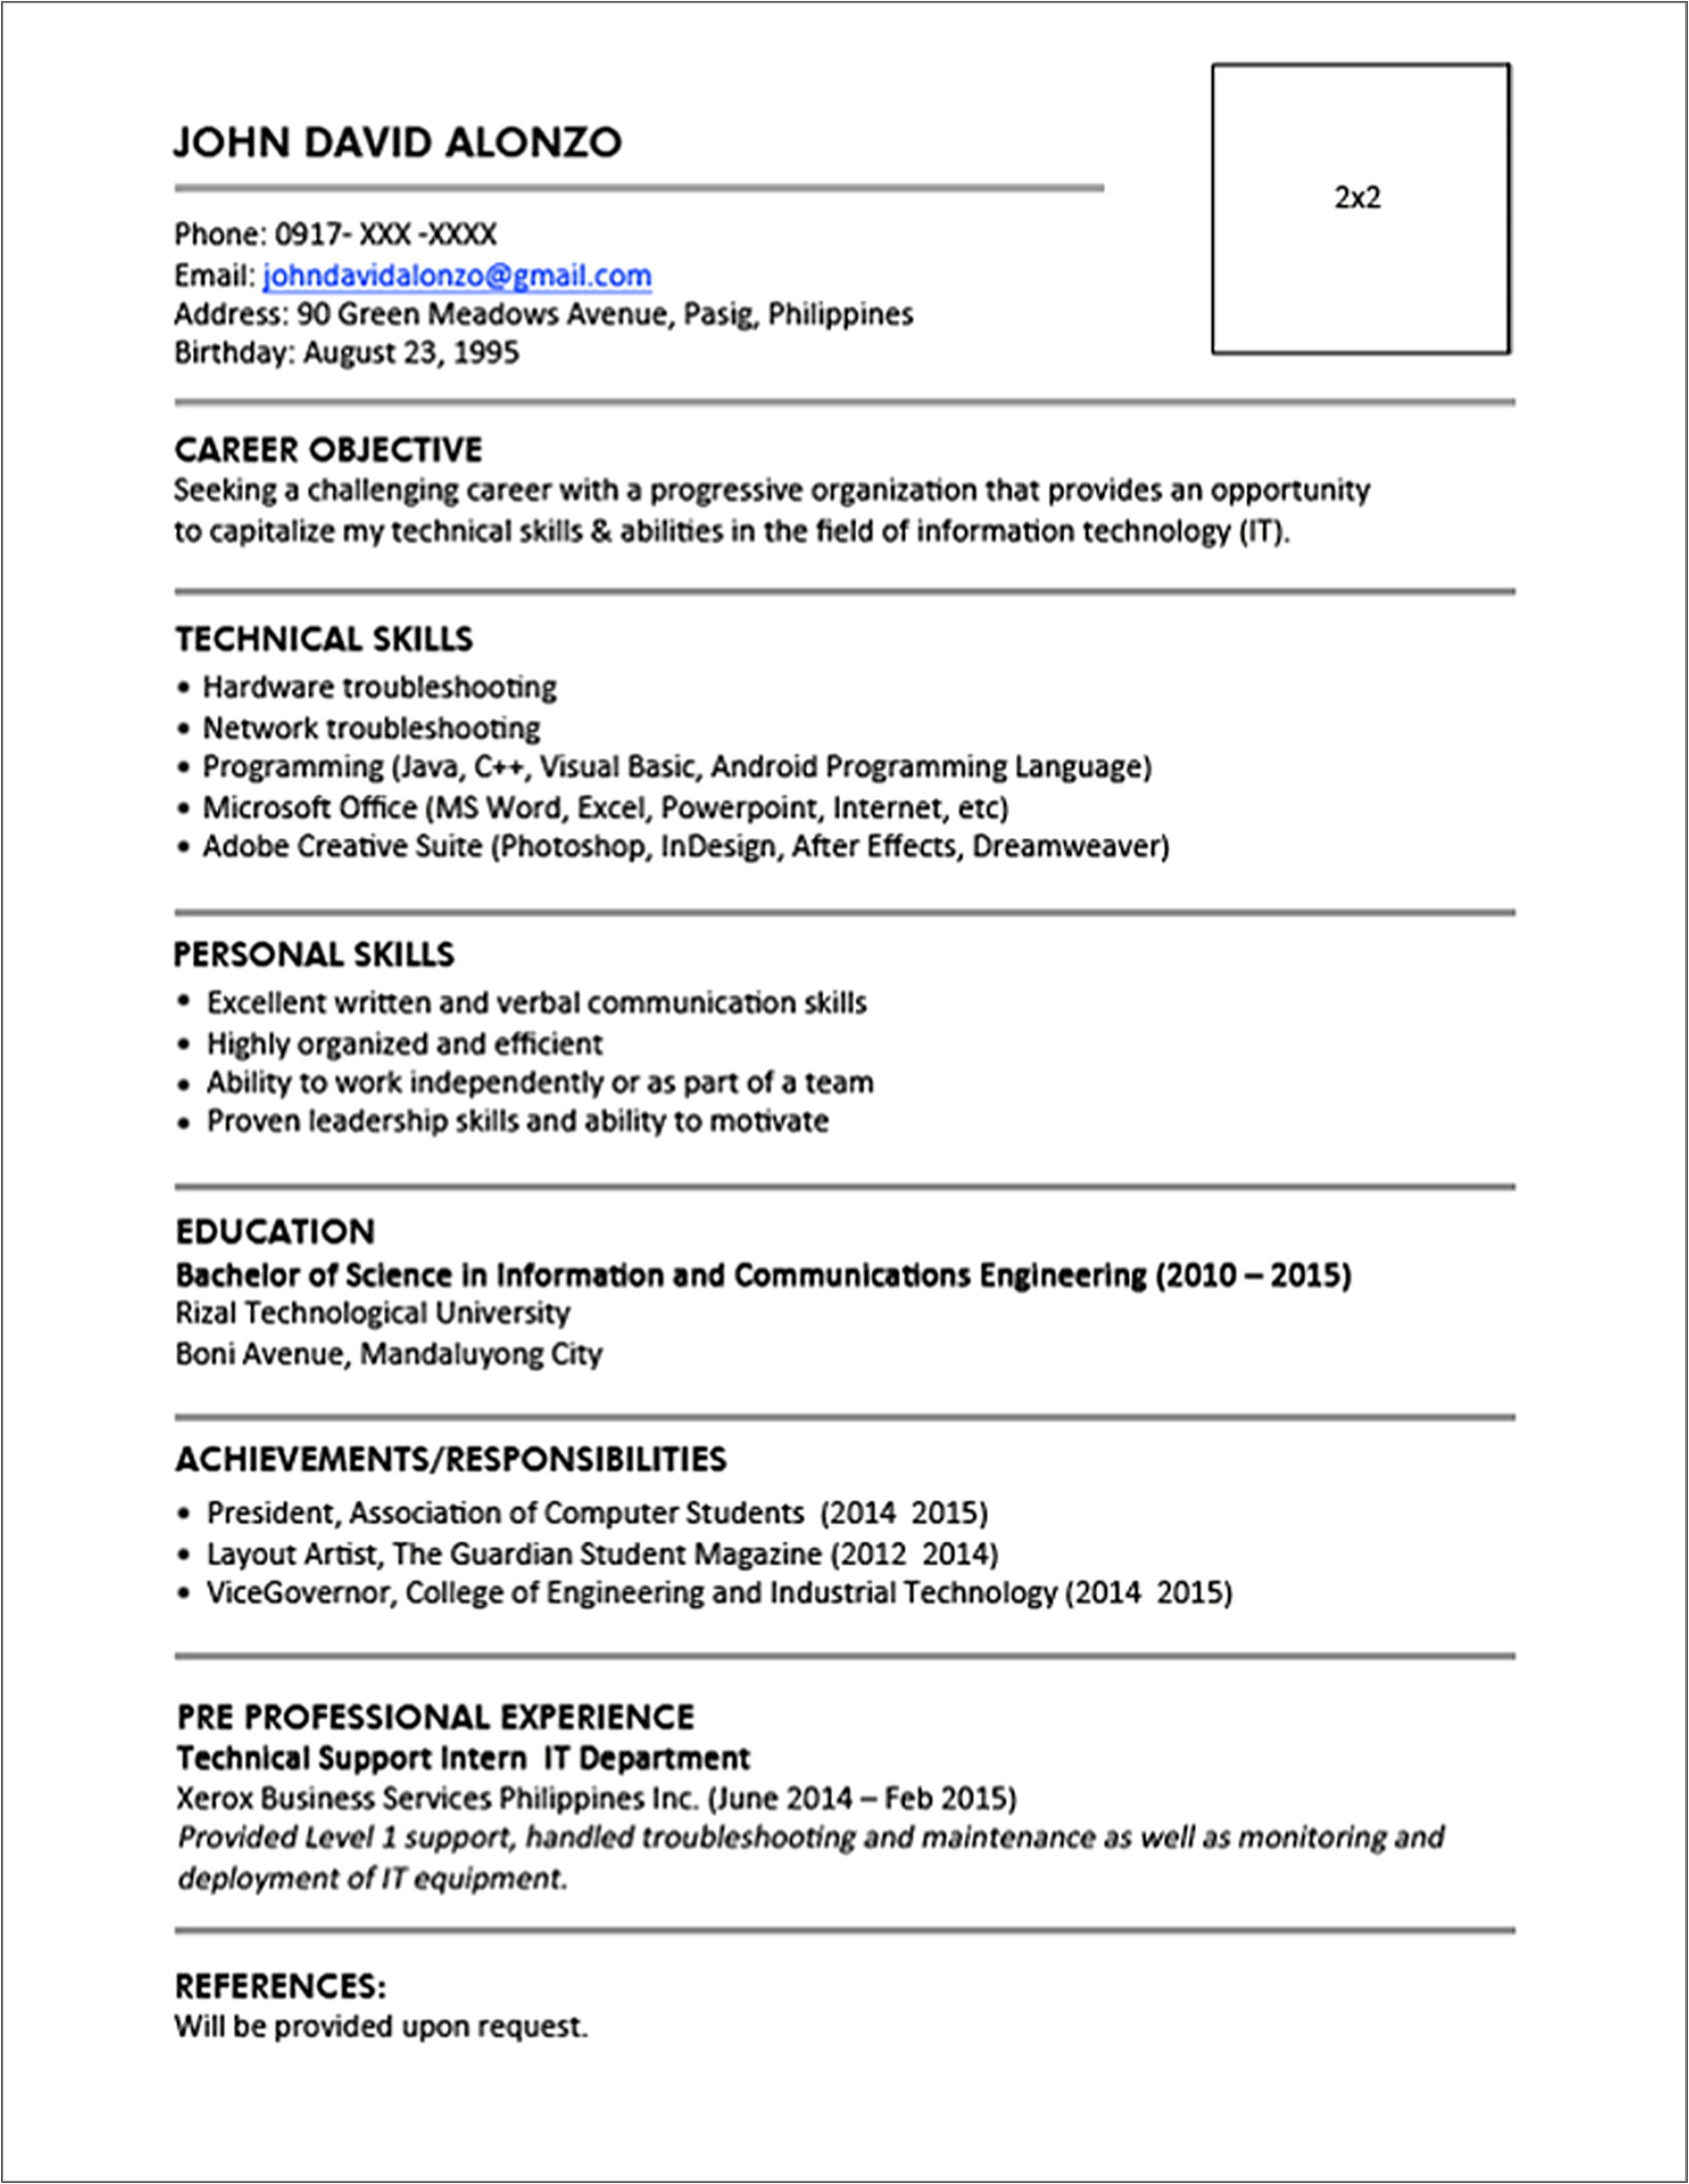 Education Part Of Resume Sample